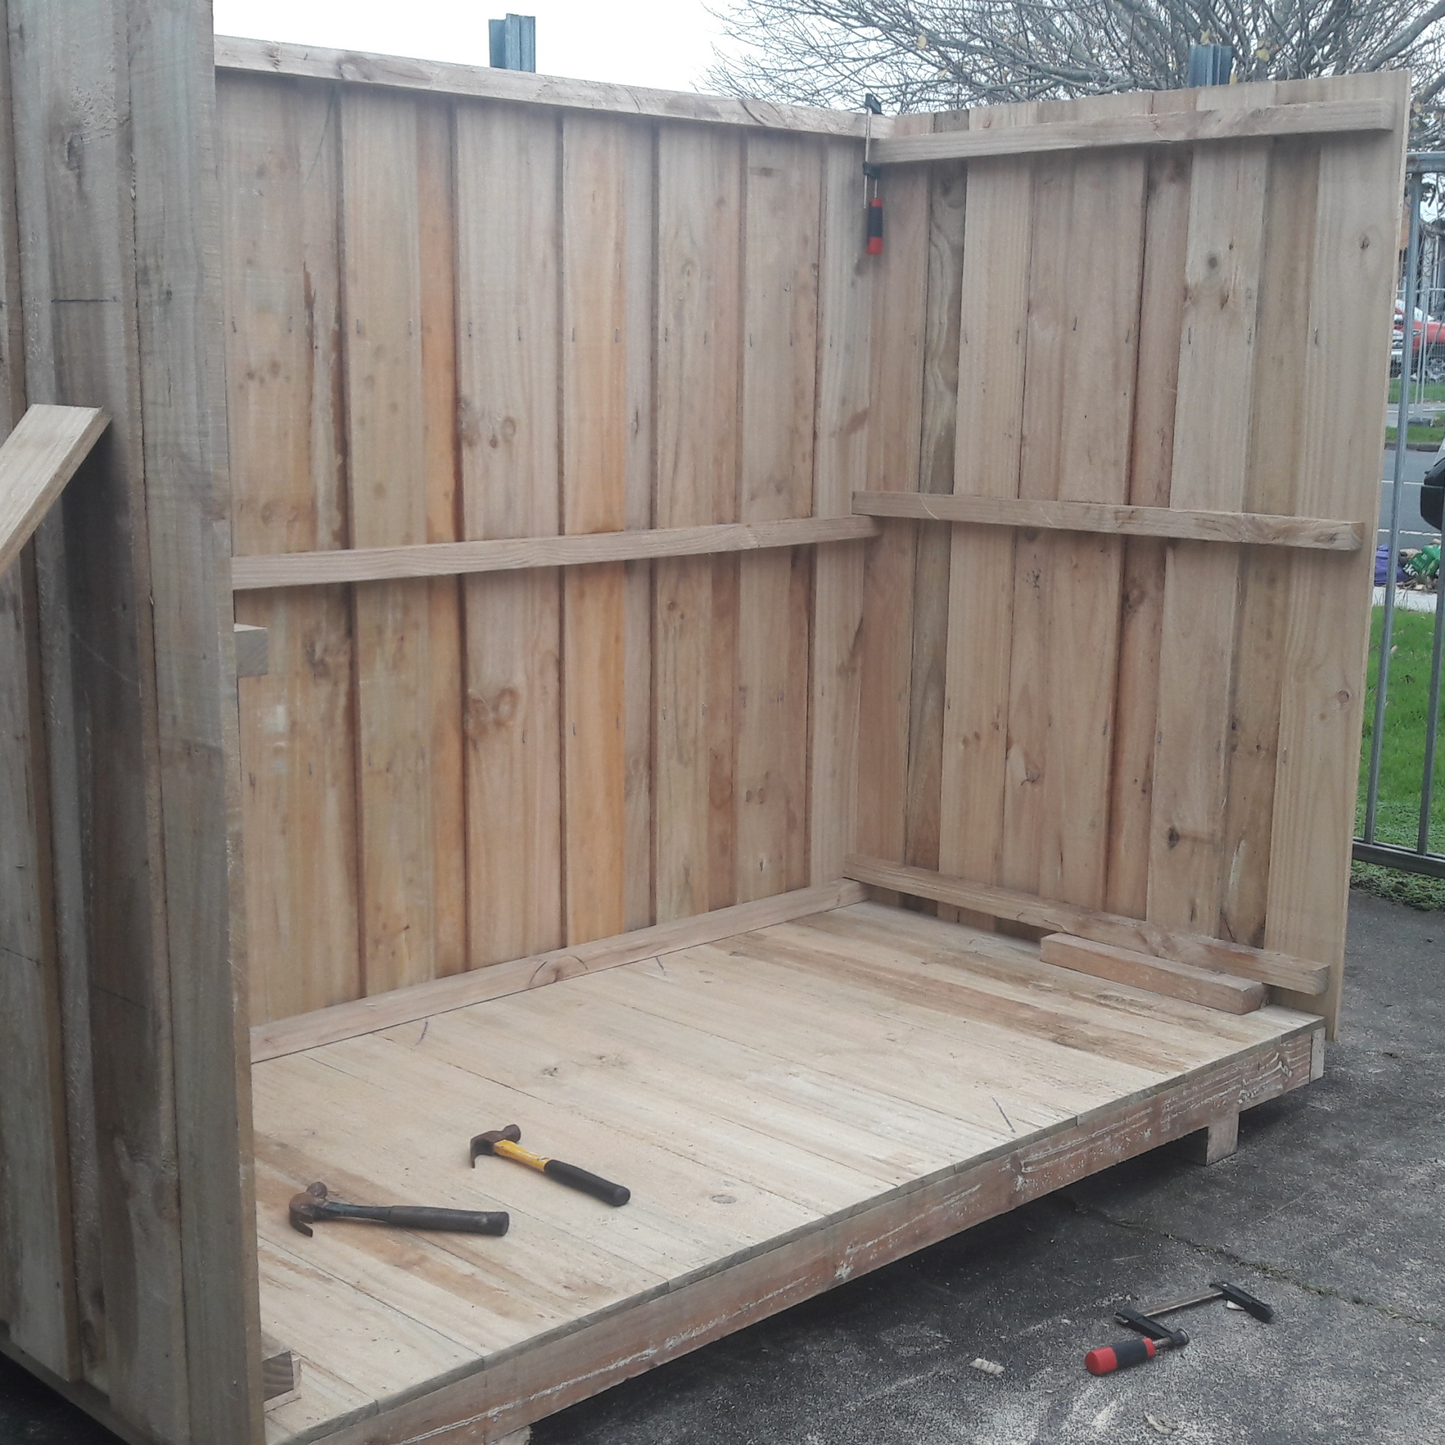 DIY Plans for a 8ft x 4ft (2.4 x 1.2m) wooden shed